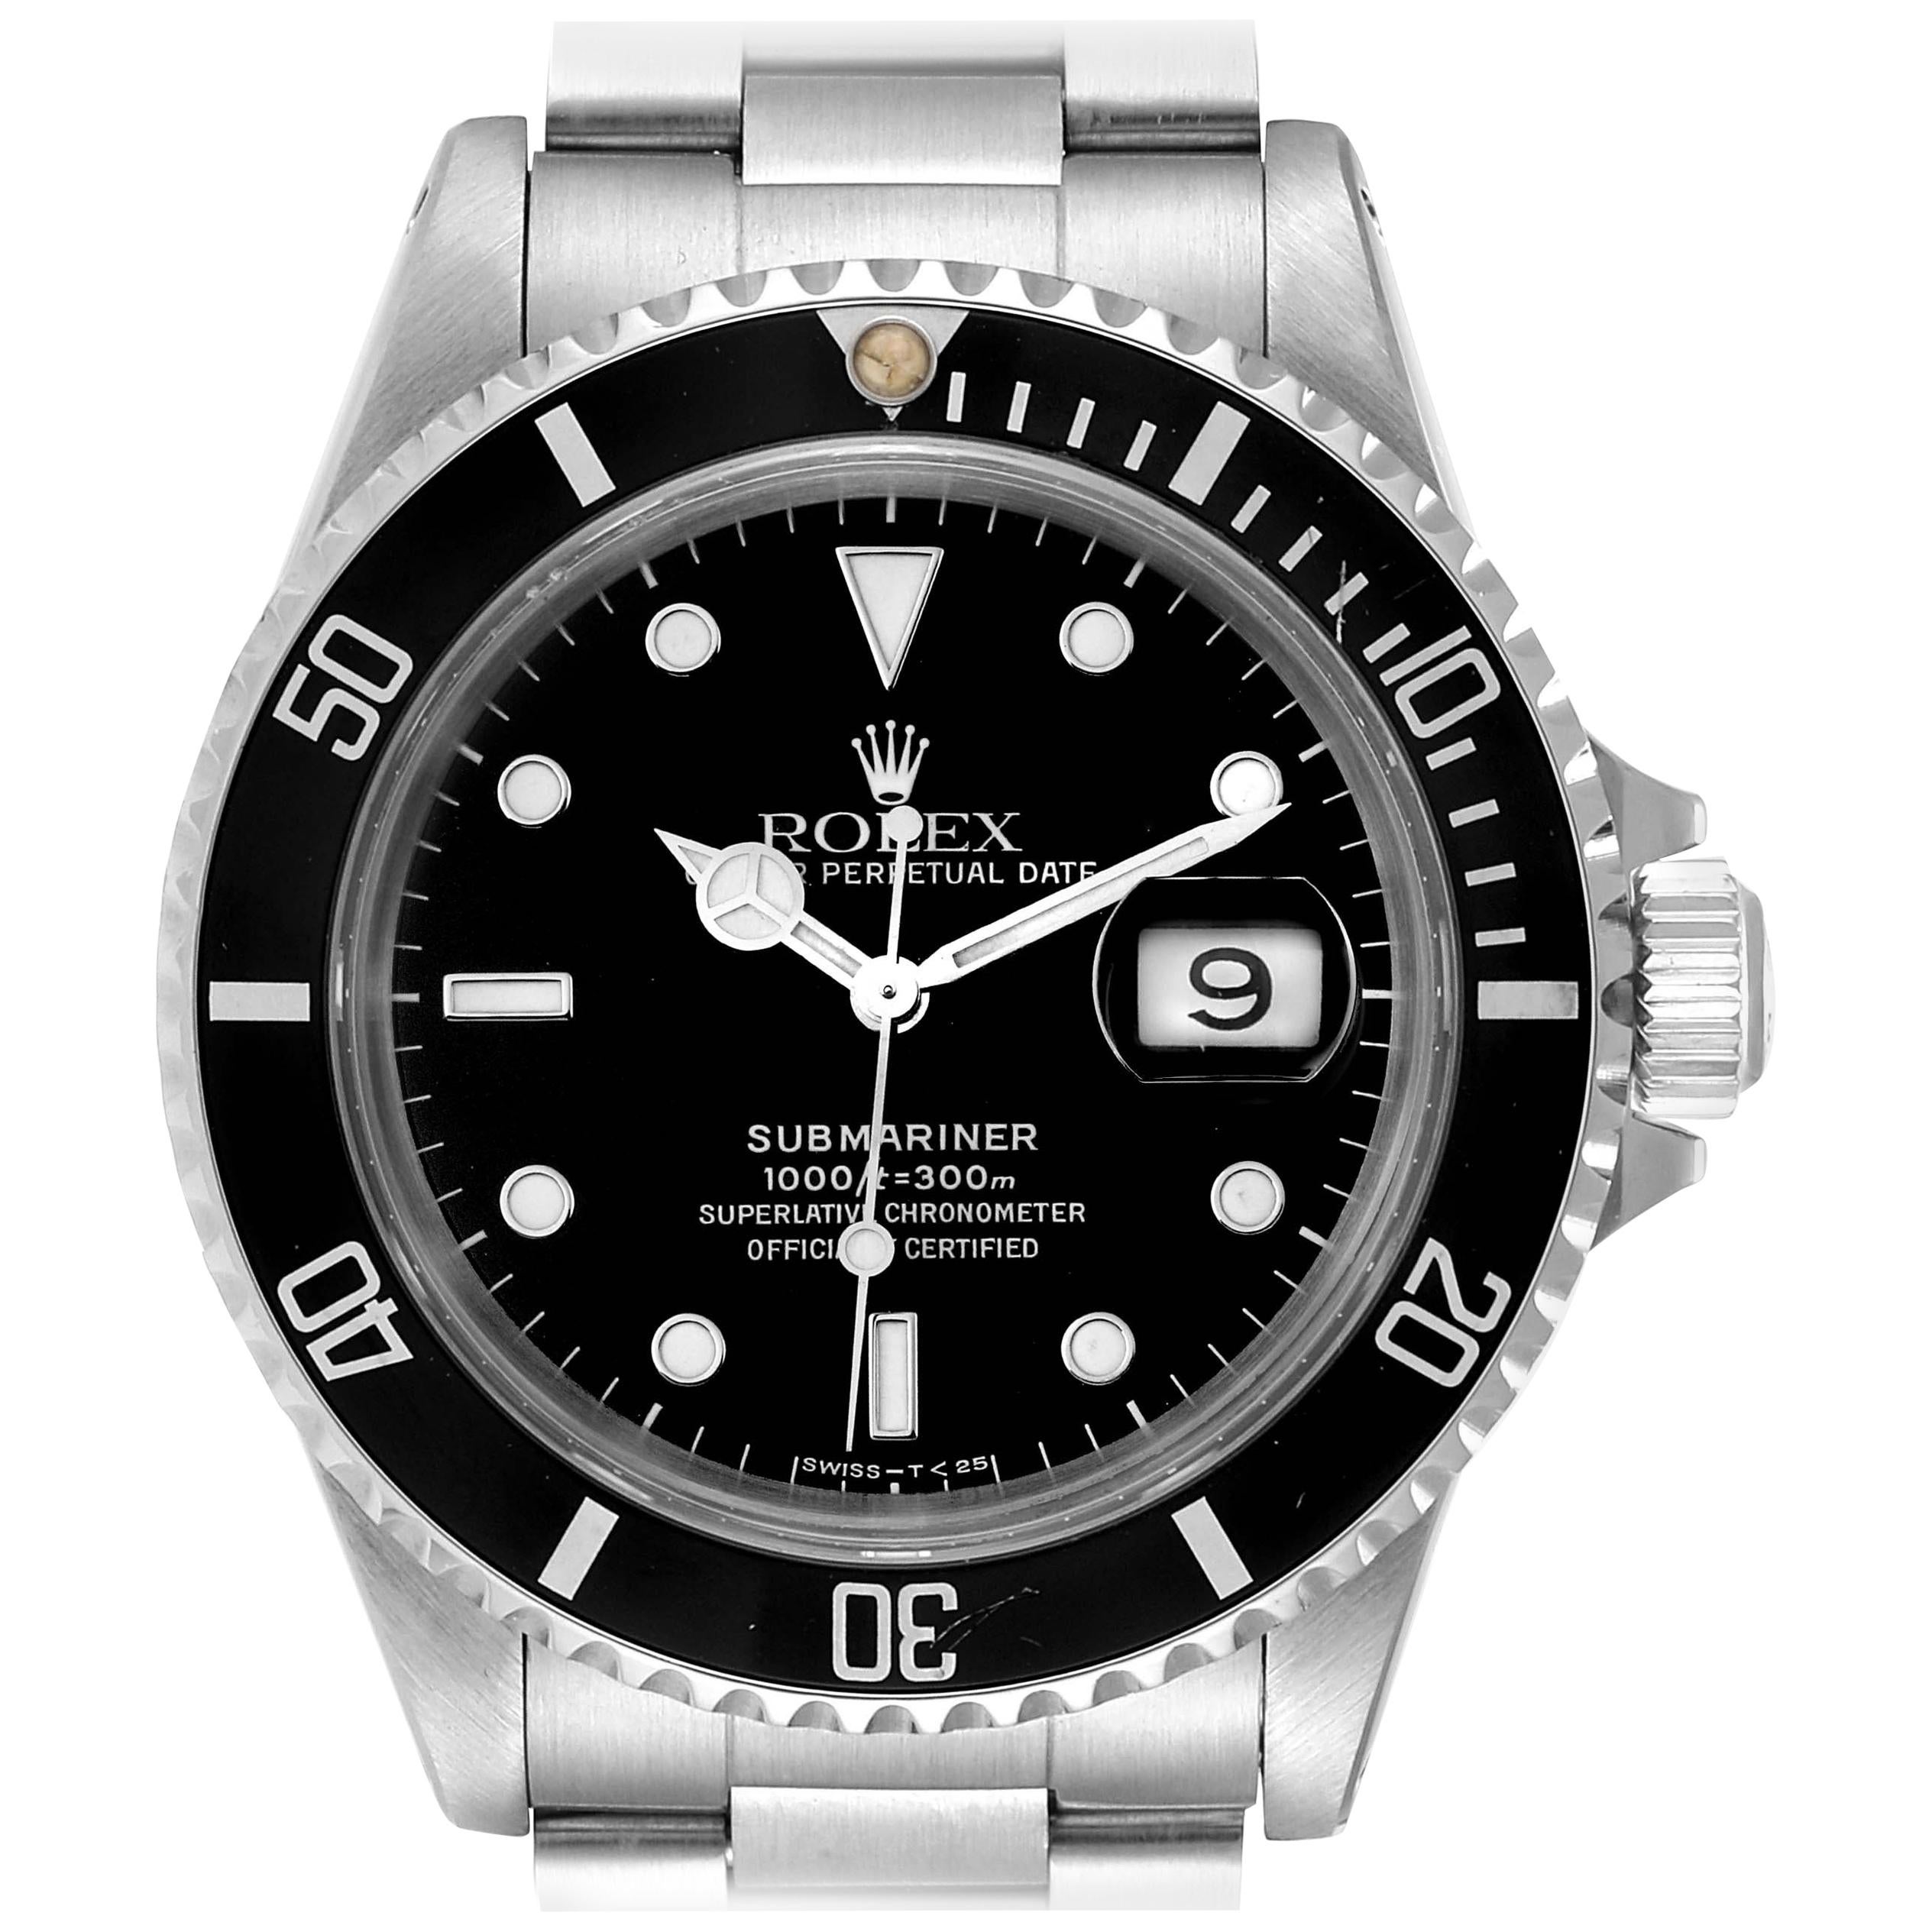 Rolex Submariner Black Dial Stainless Steel Men's Watch 16610 For Sale